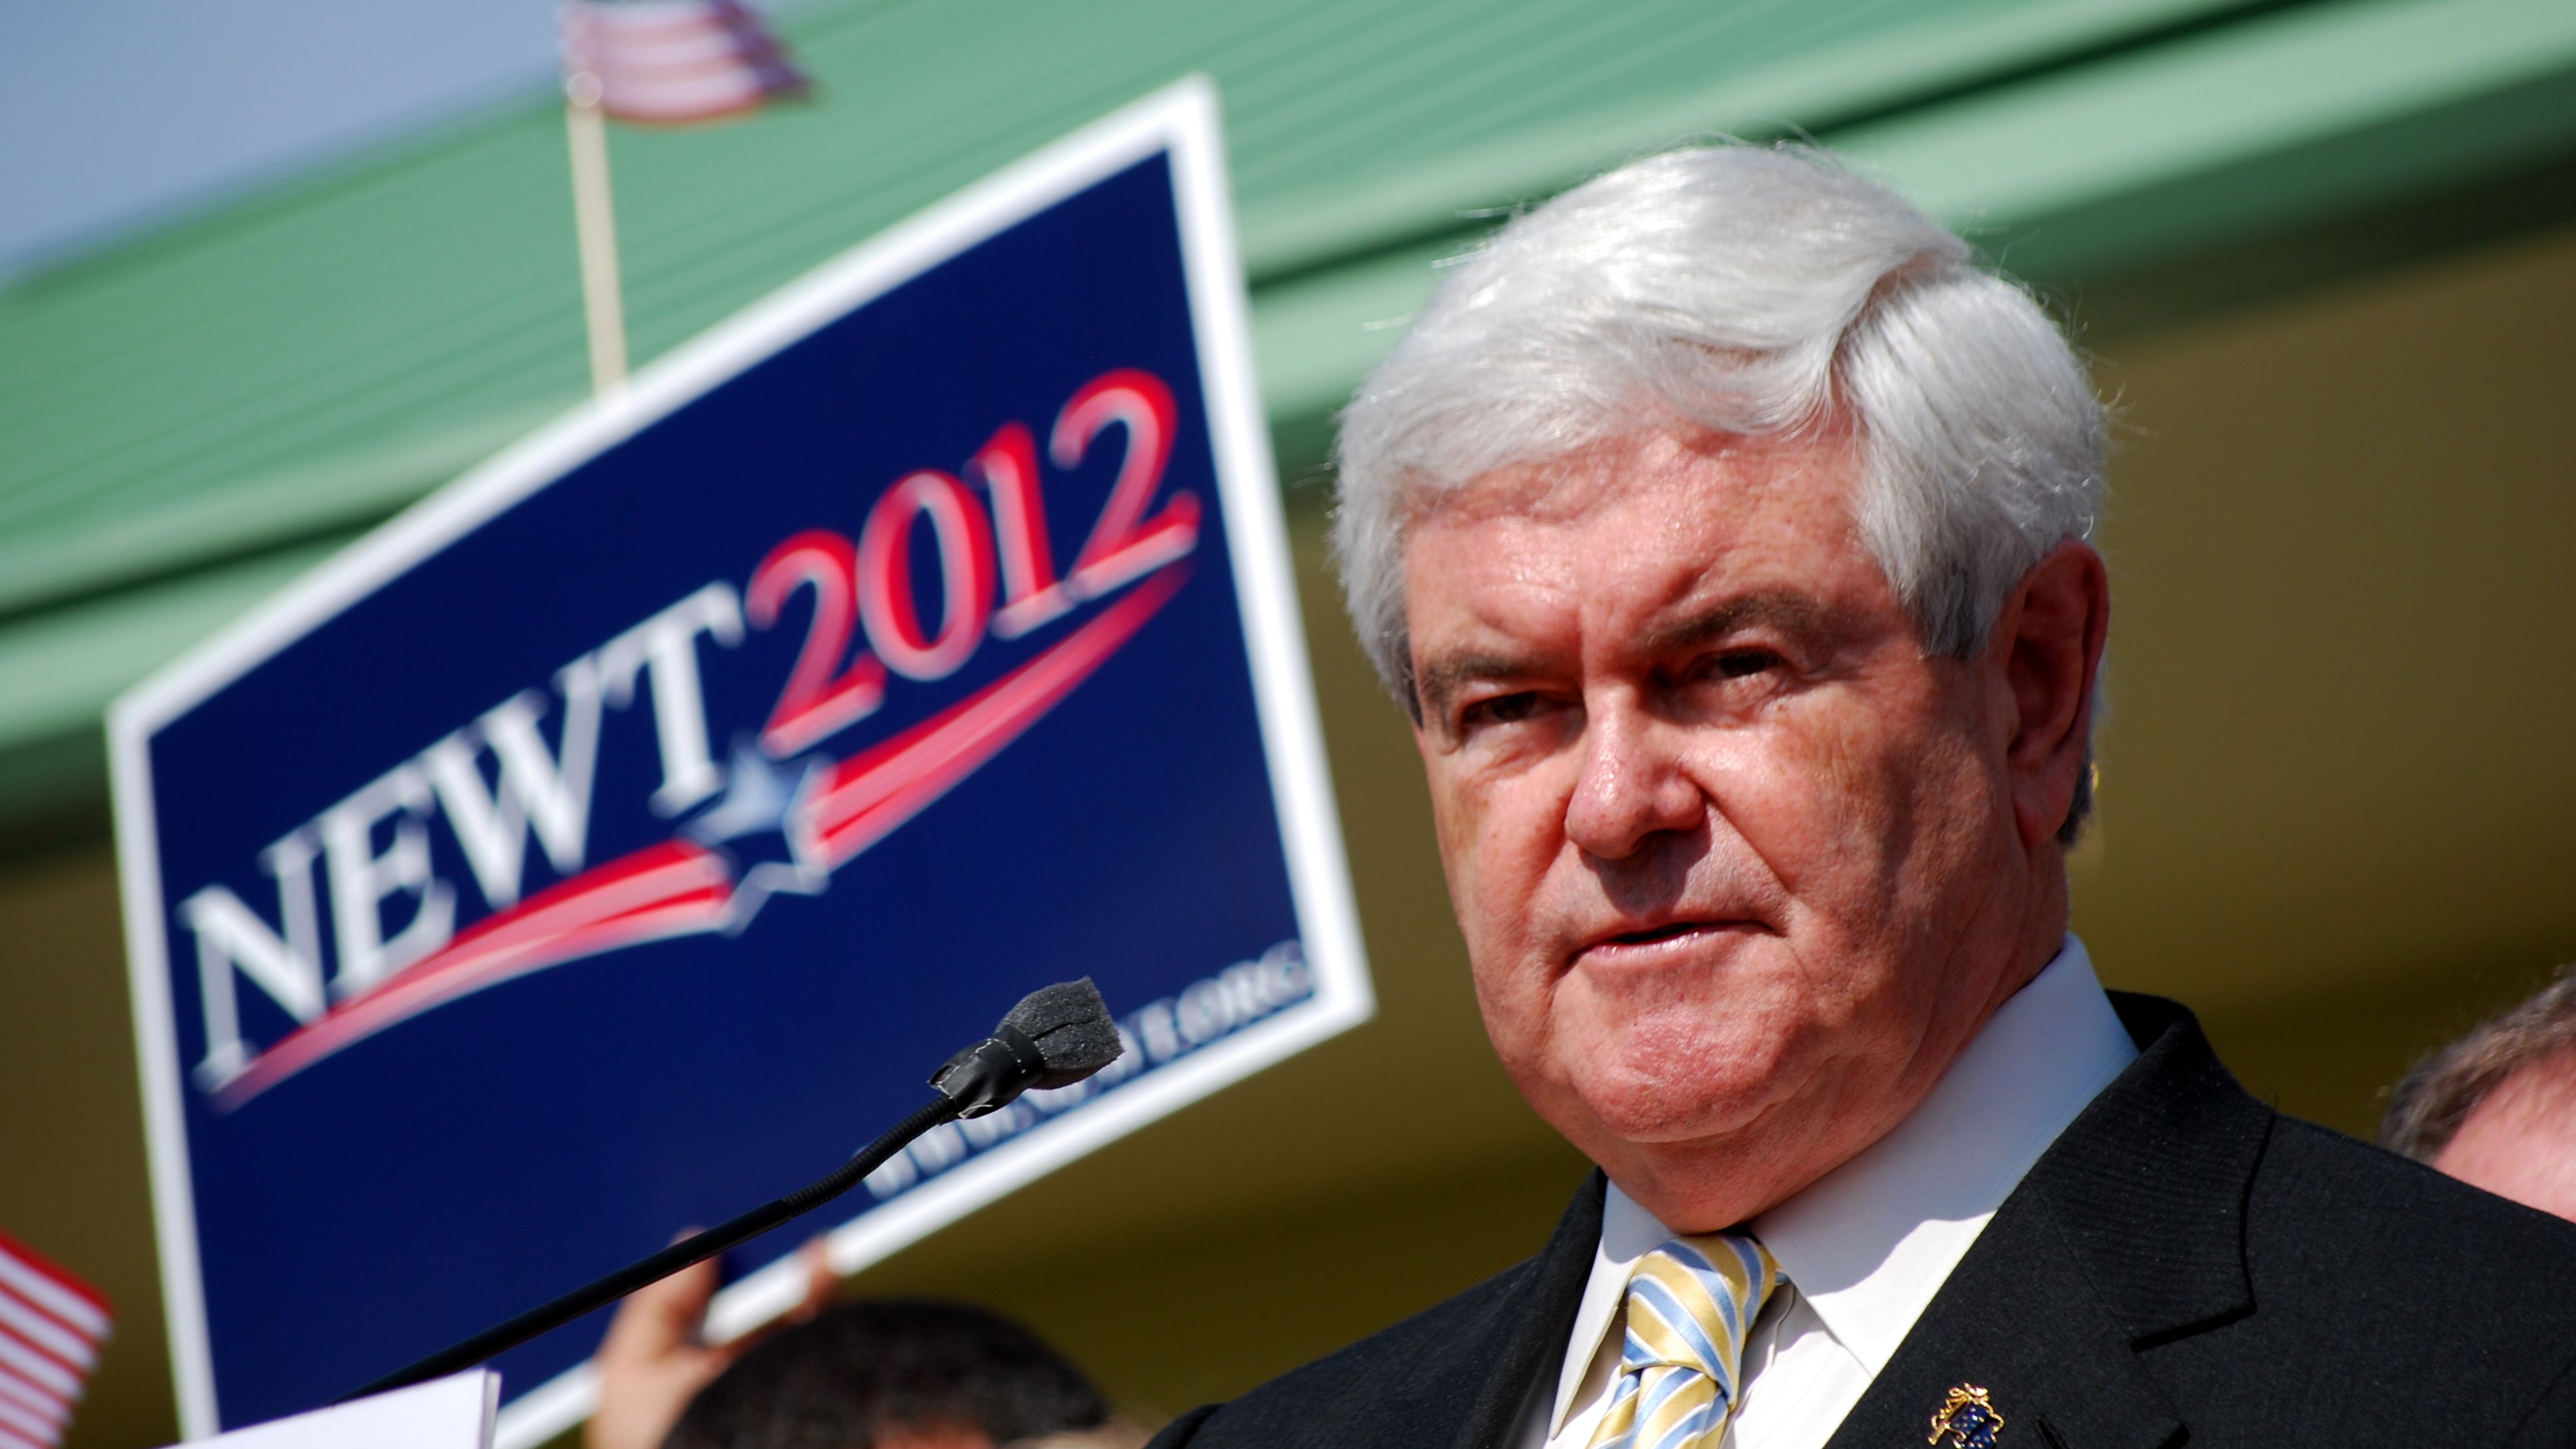 Newt Gingrich has been a target and a beneficiary of deceptive PAC advertising, says Kathleen Hall Jamieson.